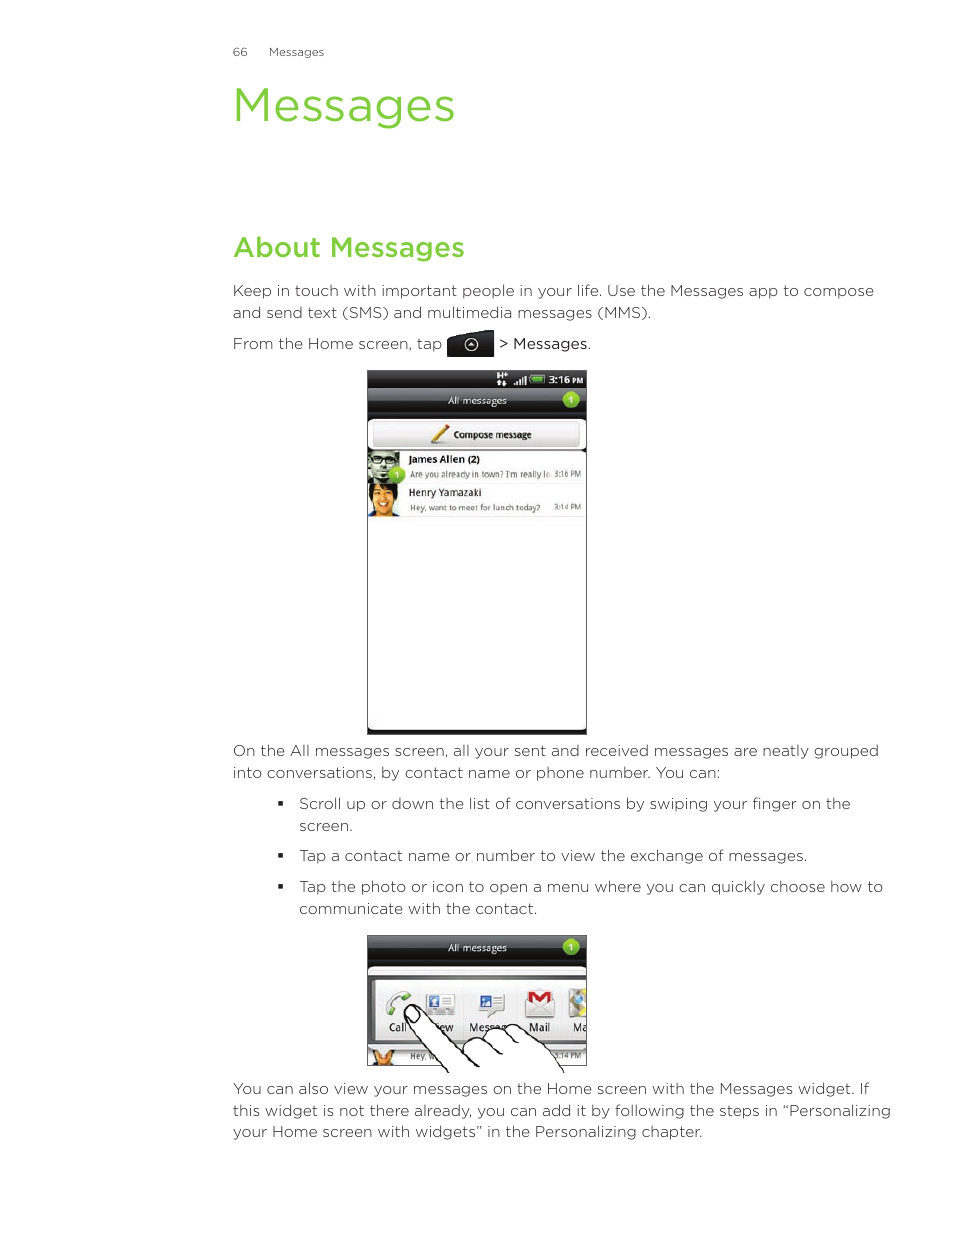 Messages, About messages | HTC Inspire 4G User Manual | Page 66 / 206